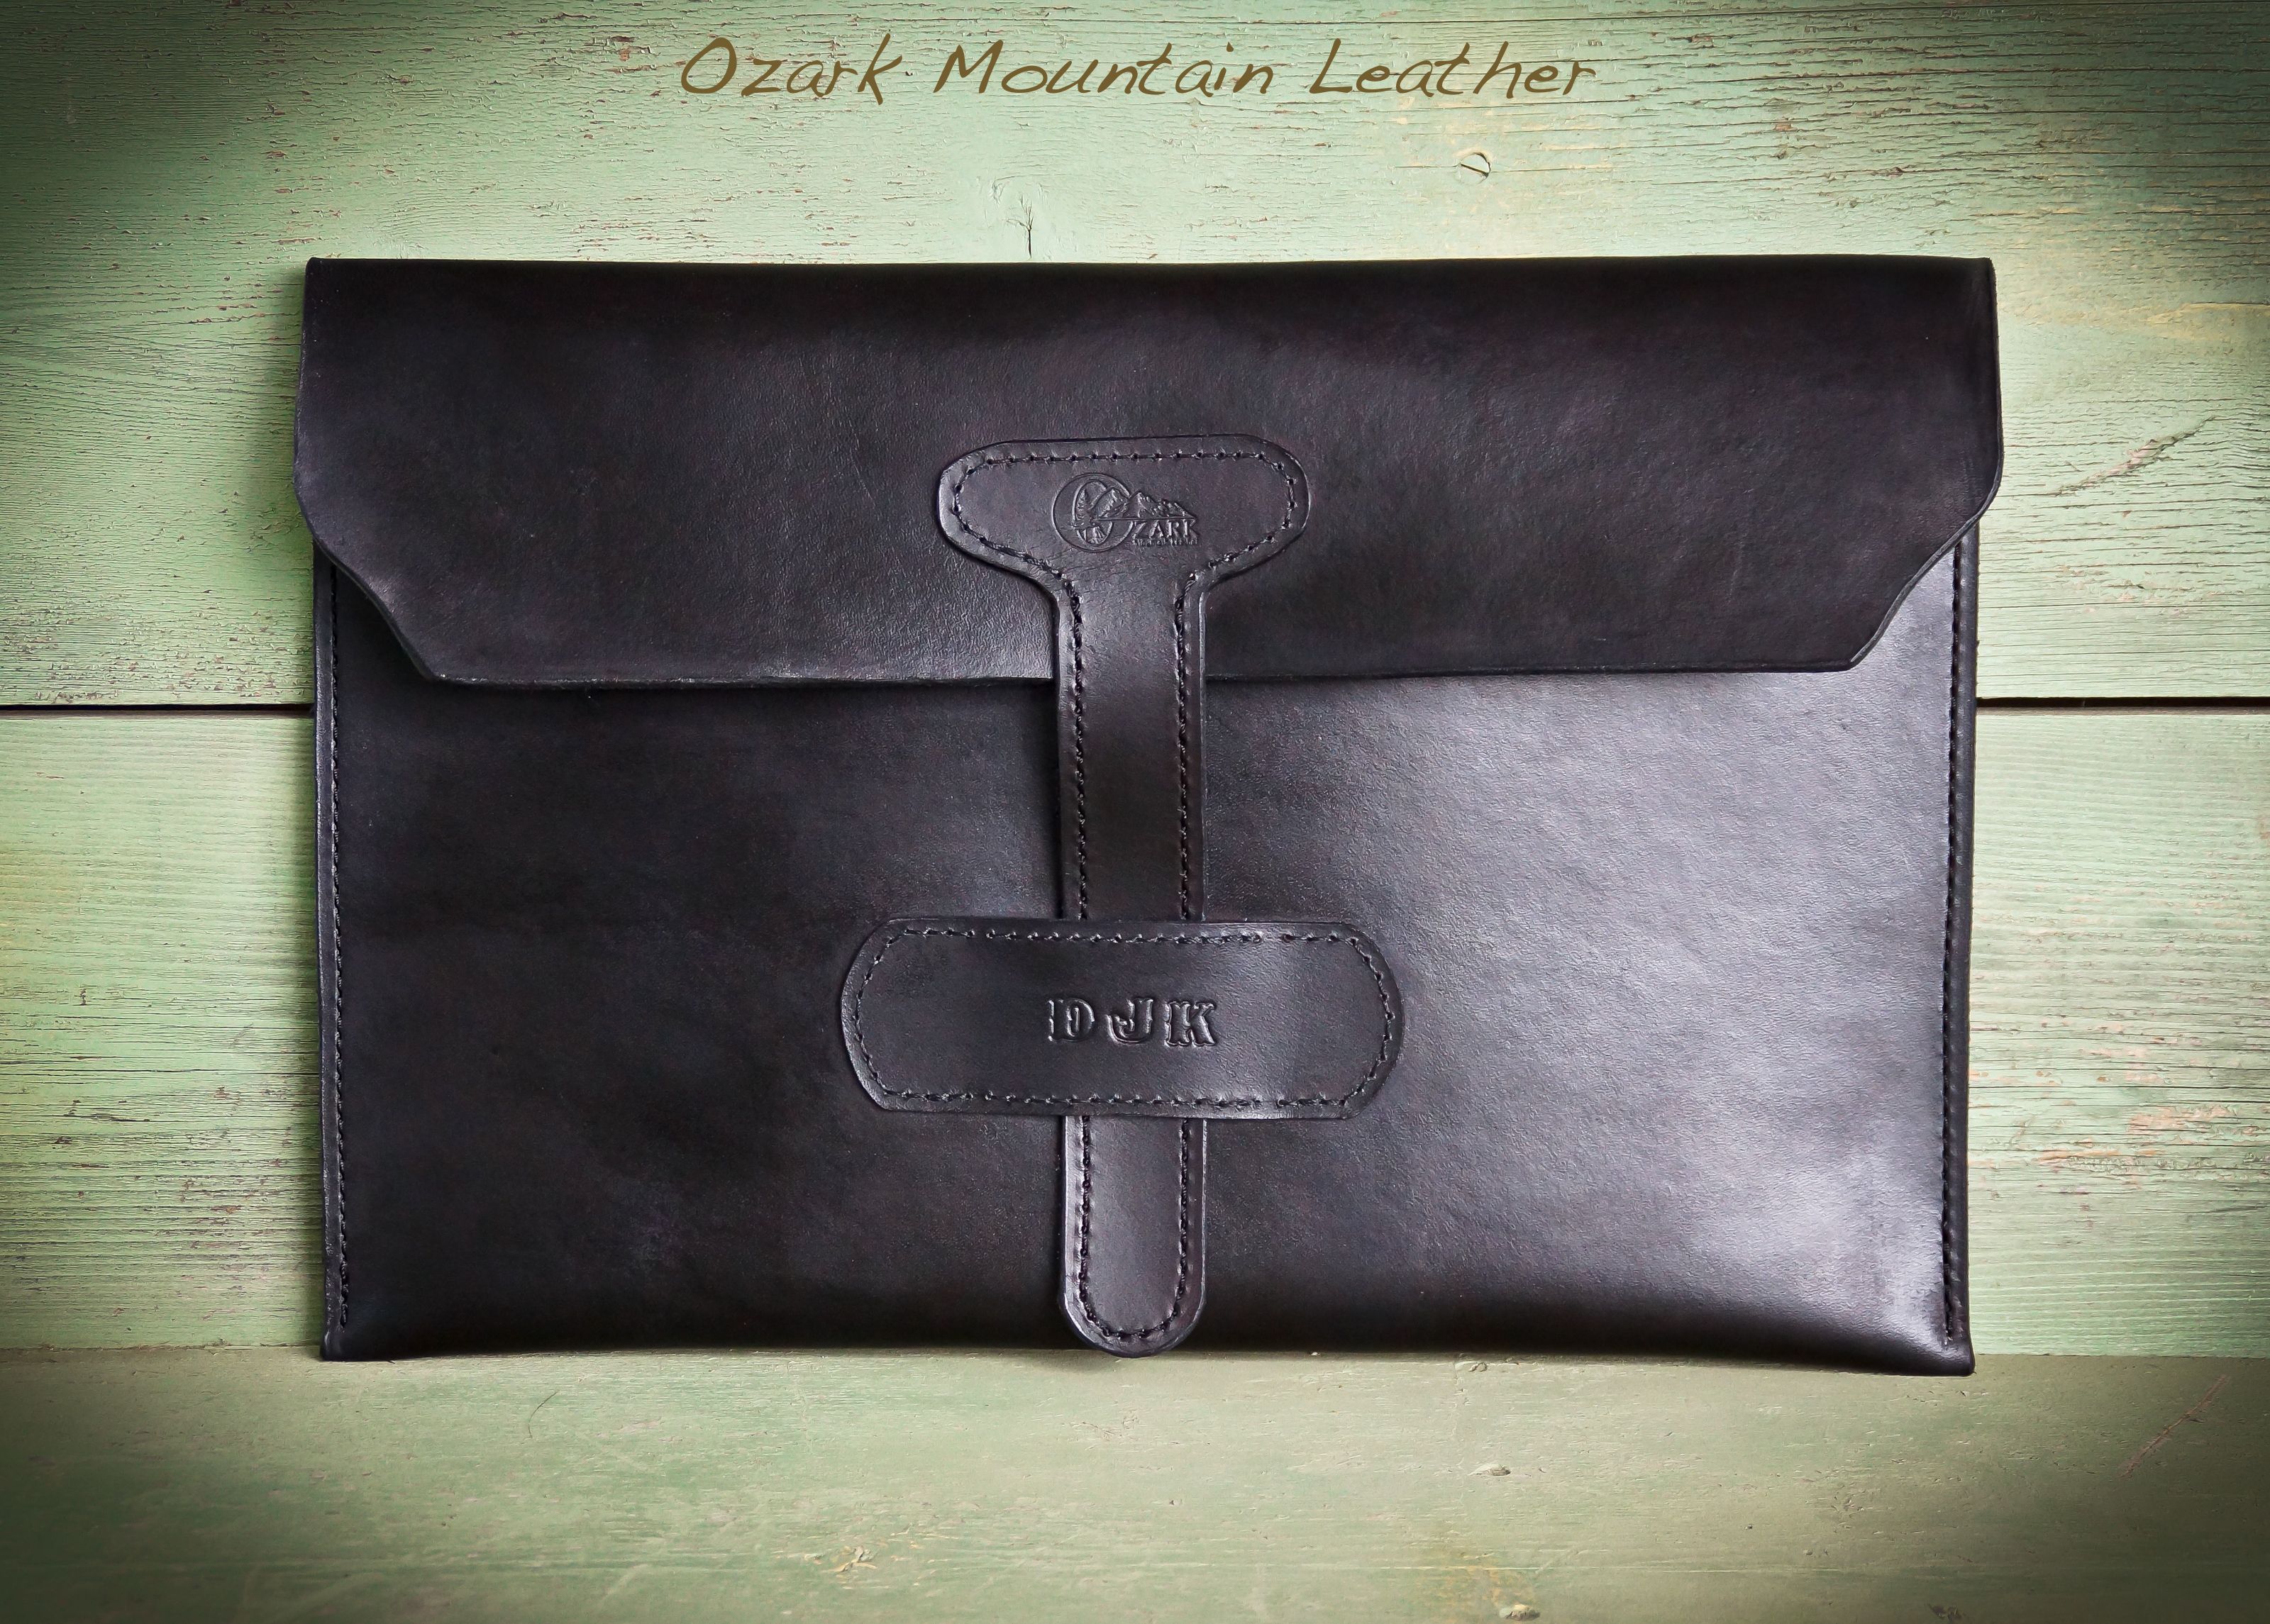 Buy Custom Leather Drawing Portfolio, made to order from Ozark Mountain